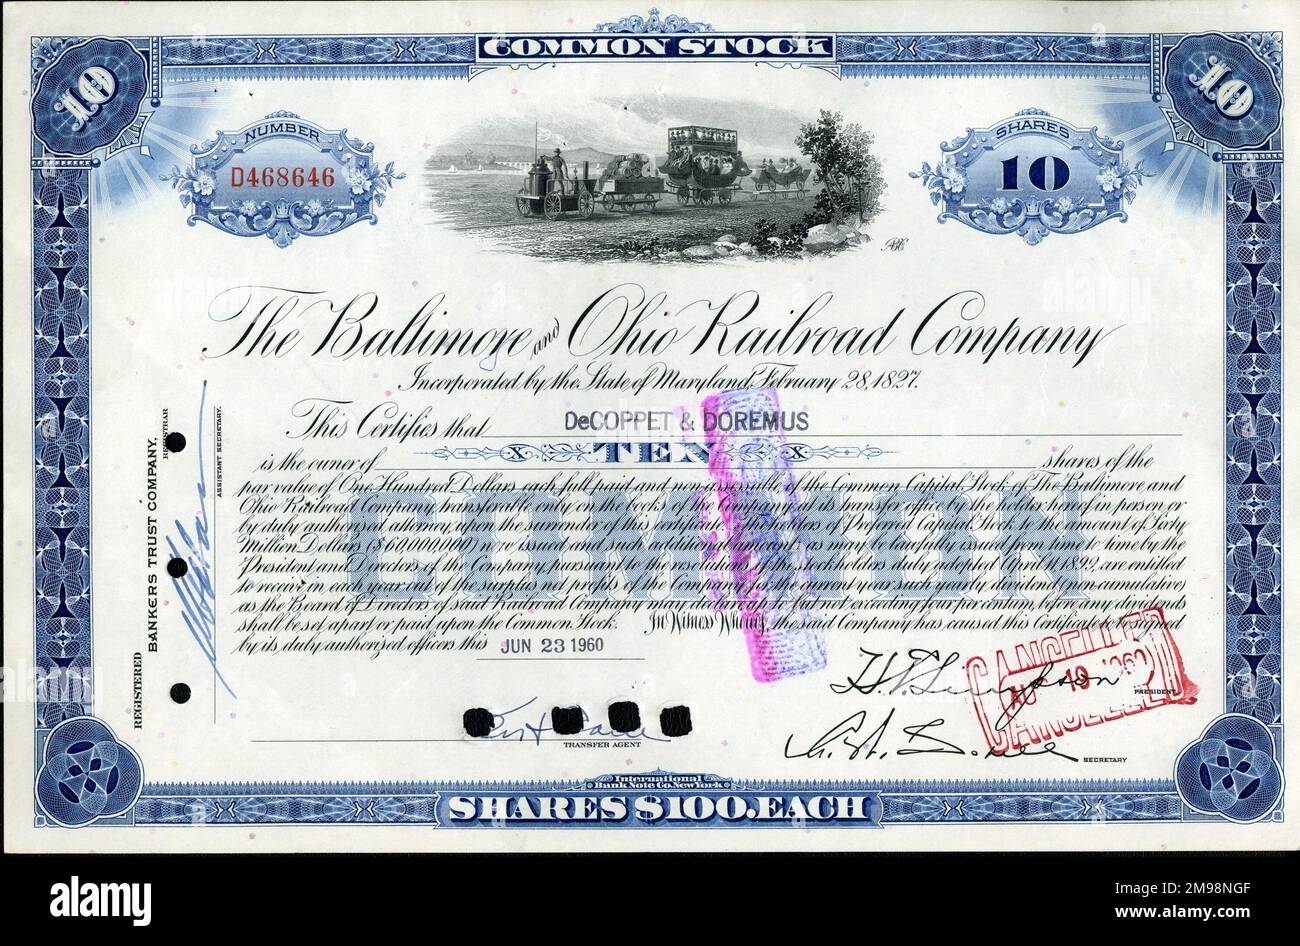 Stock Share Certificate - Baltimore and Ohio Railroad Company, 10 shares. Stock Photo